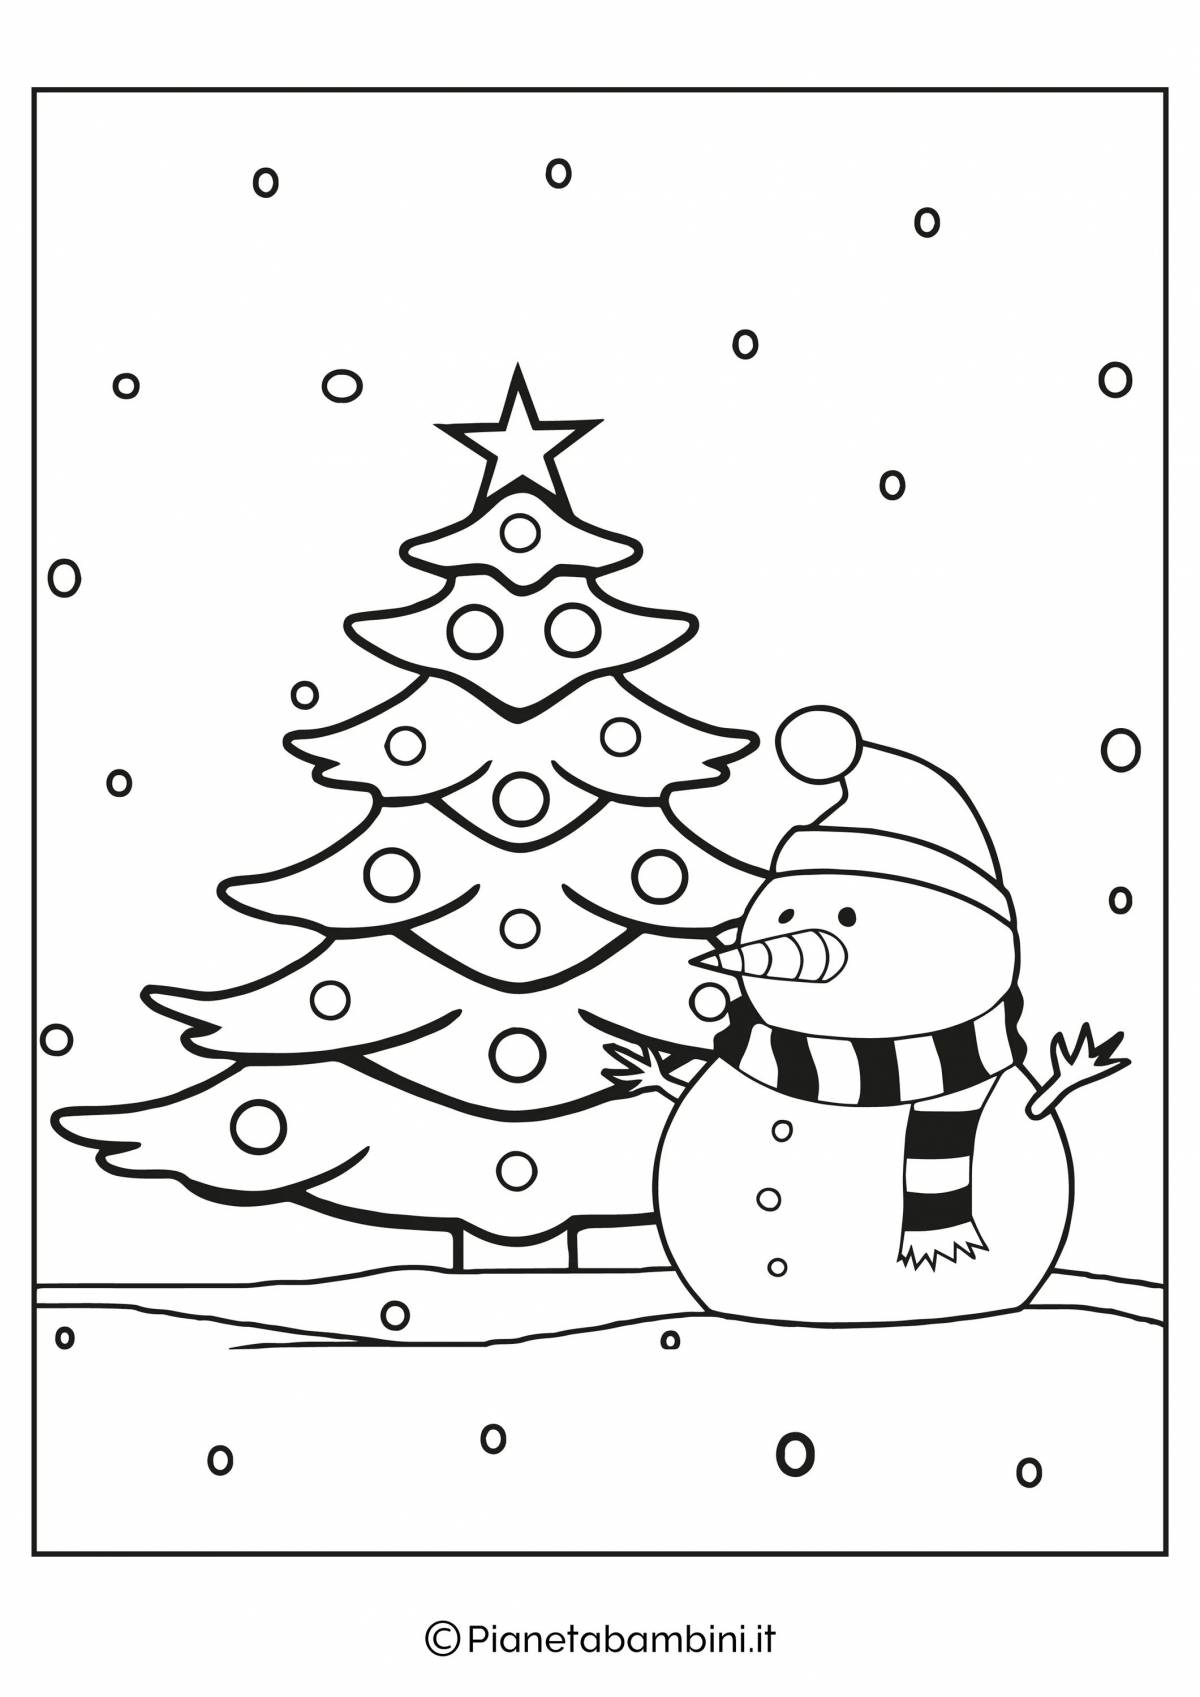 Coloring book dazzling forest grew a Christmas tree